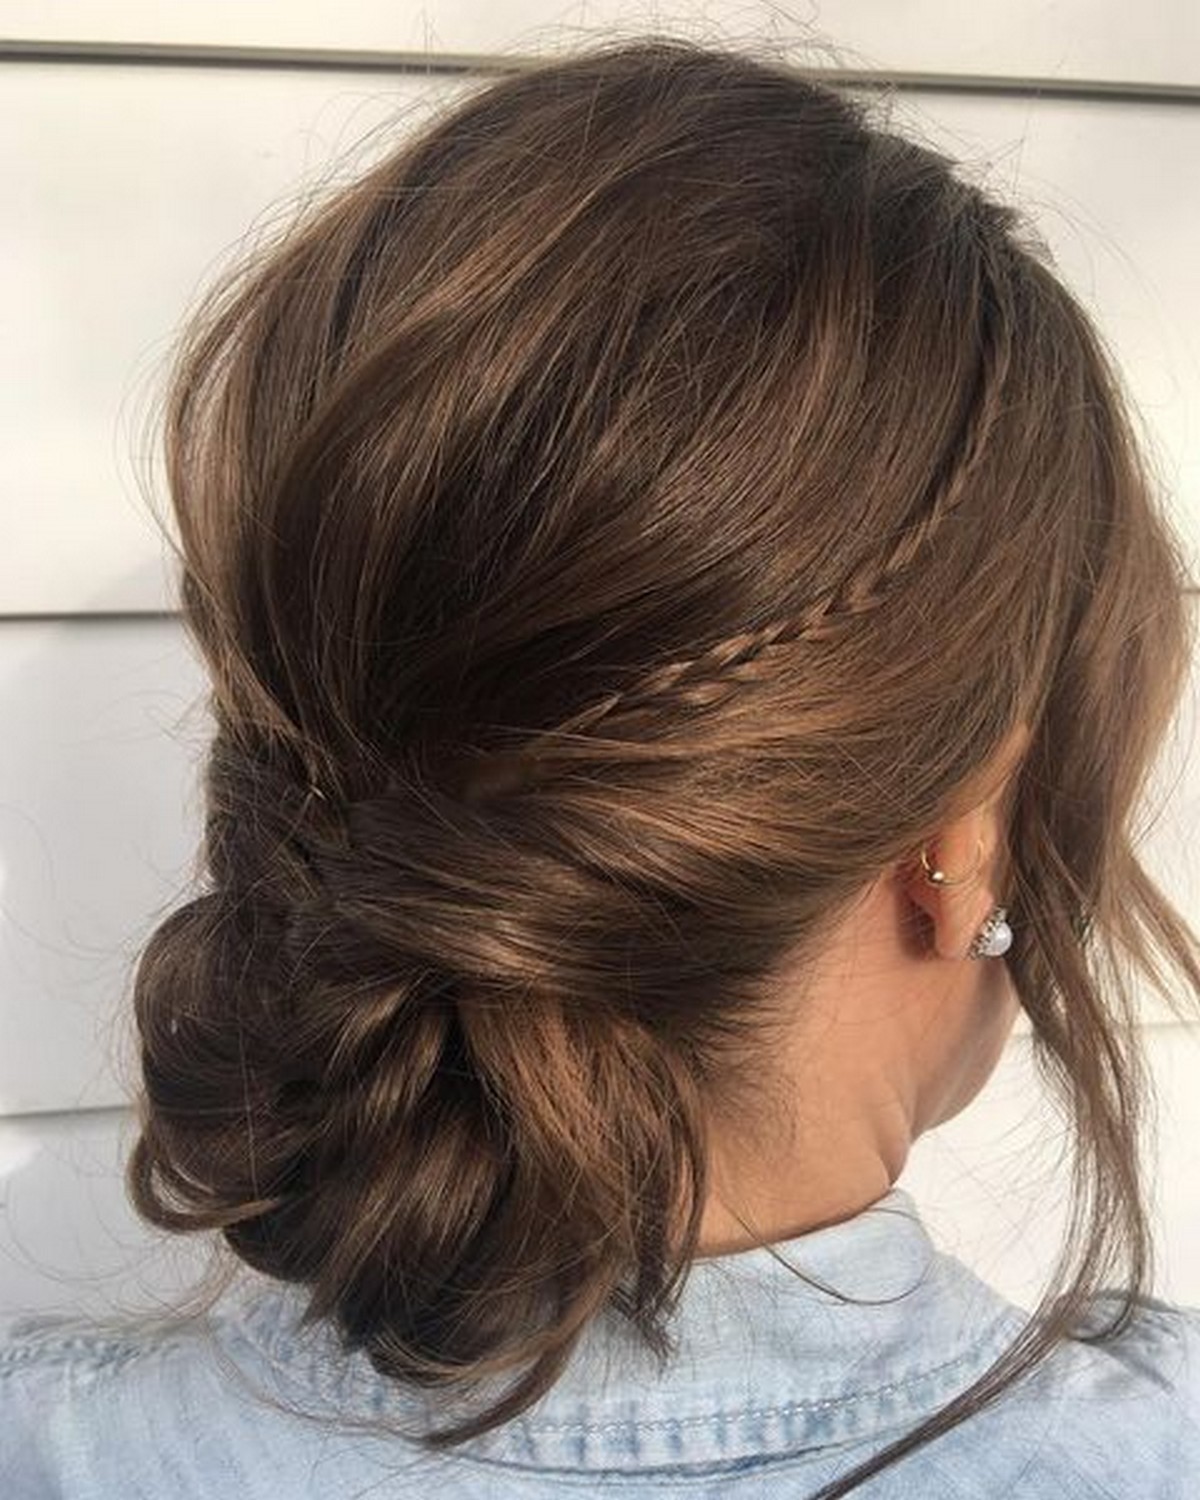 Textured Chignon Updo With Braided Elements